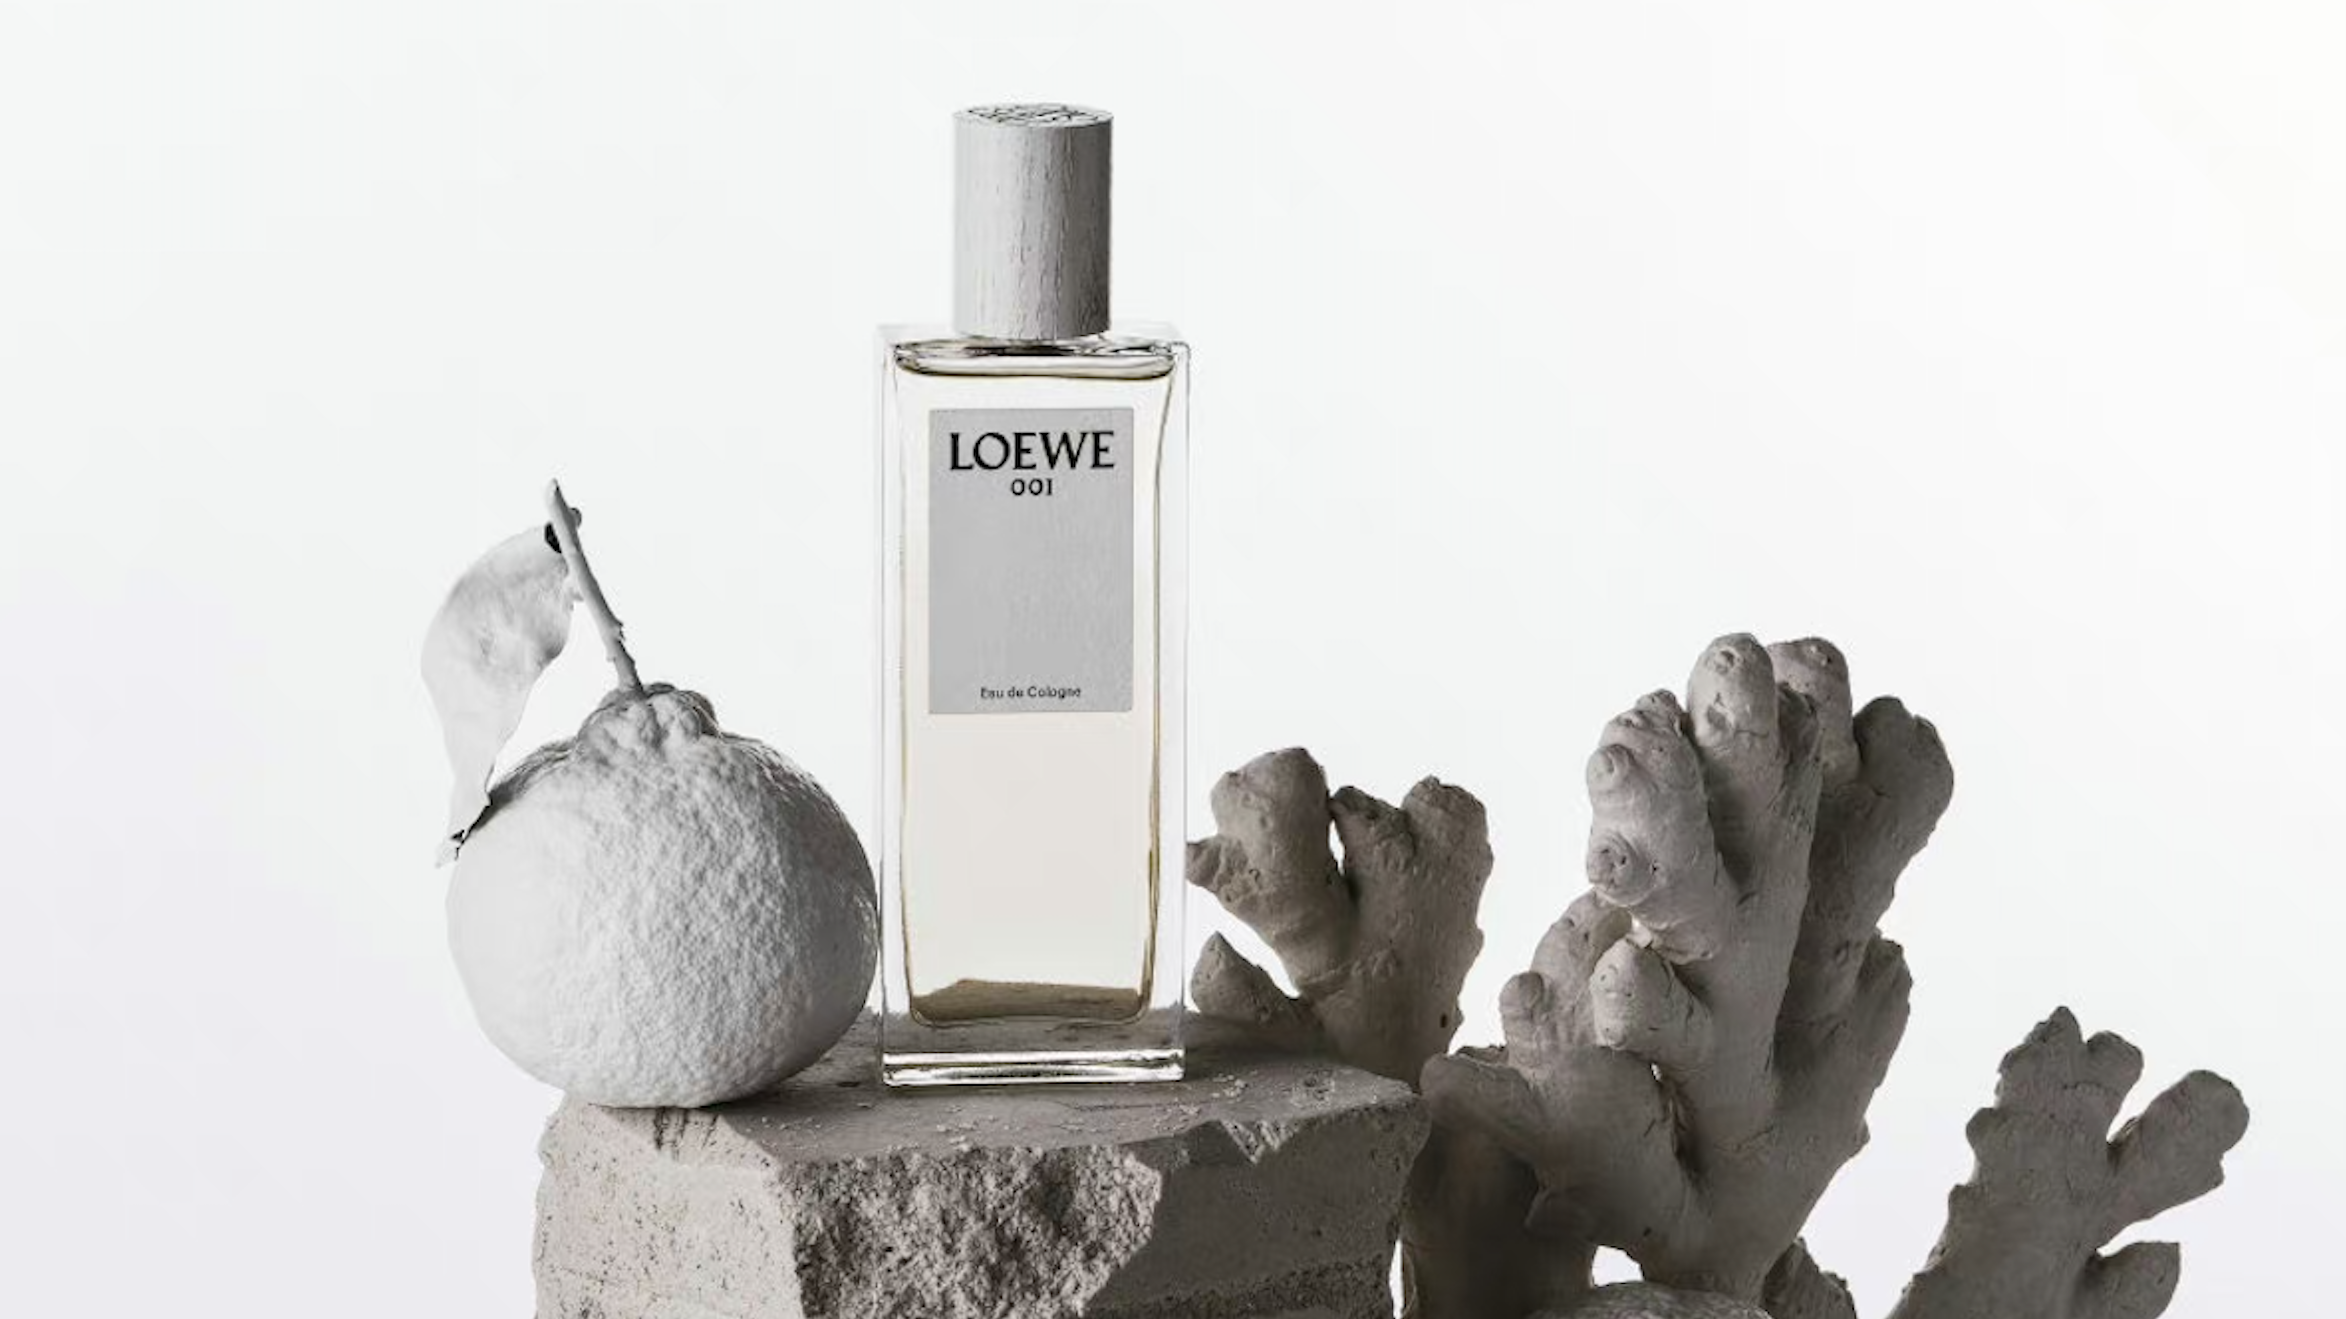 New olfactive trends and the multiplication of international and domestic offerings are reshaping China’s fragrance market. How should brands adapt? Image: Loewe